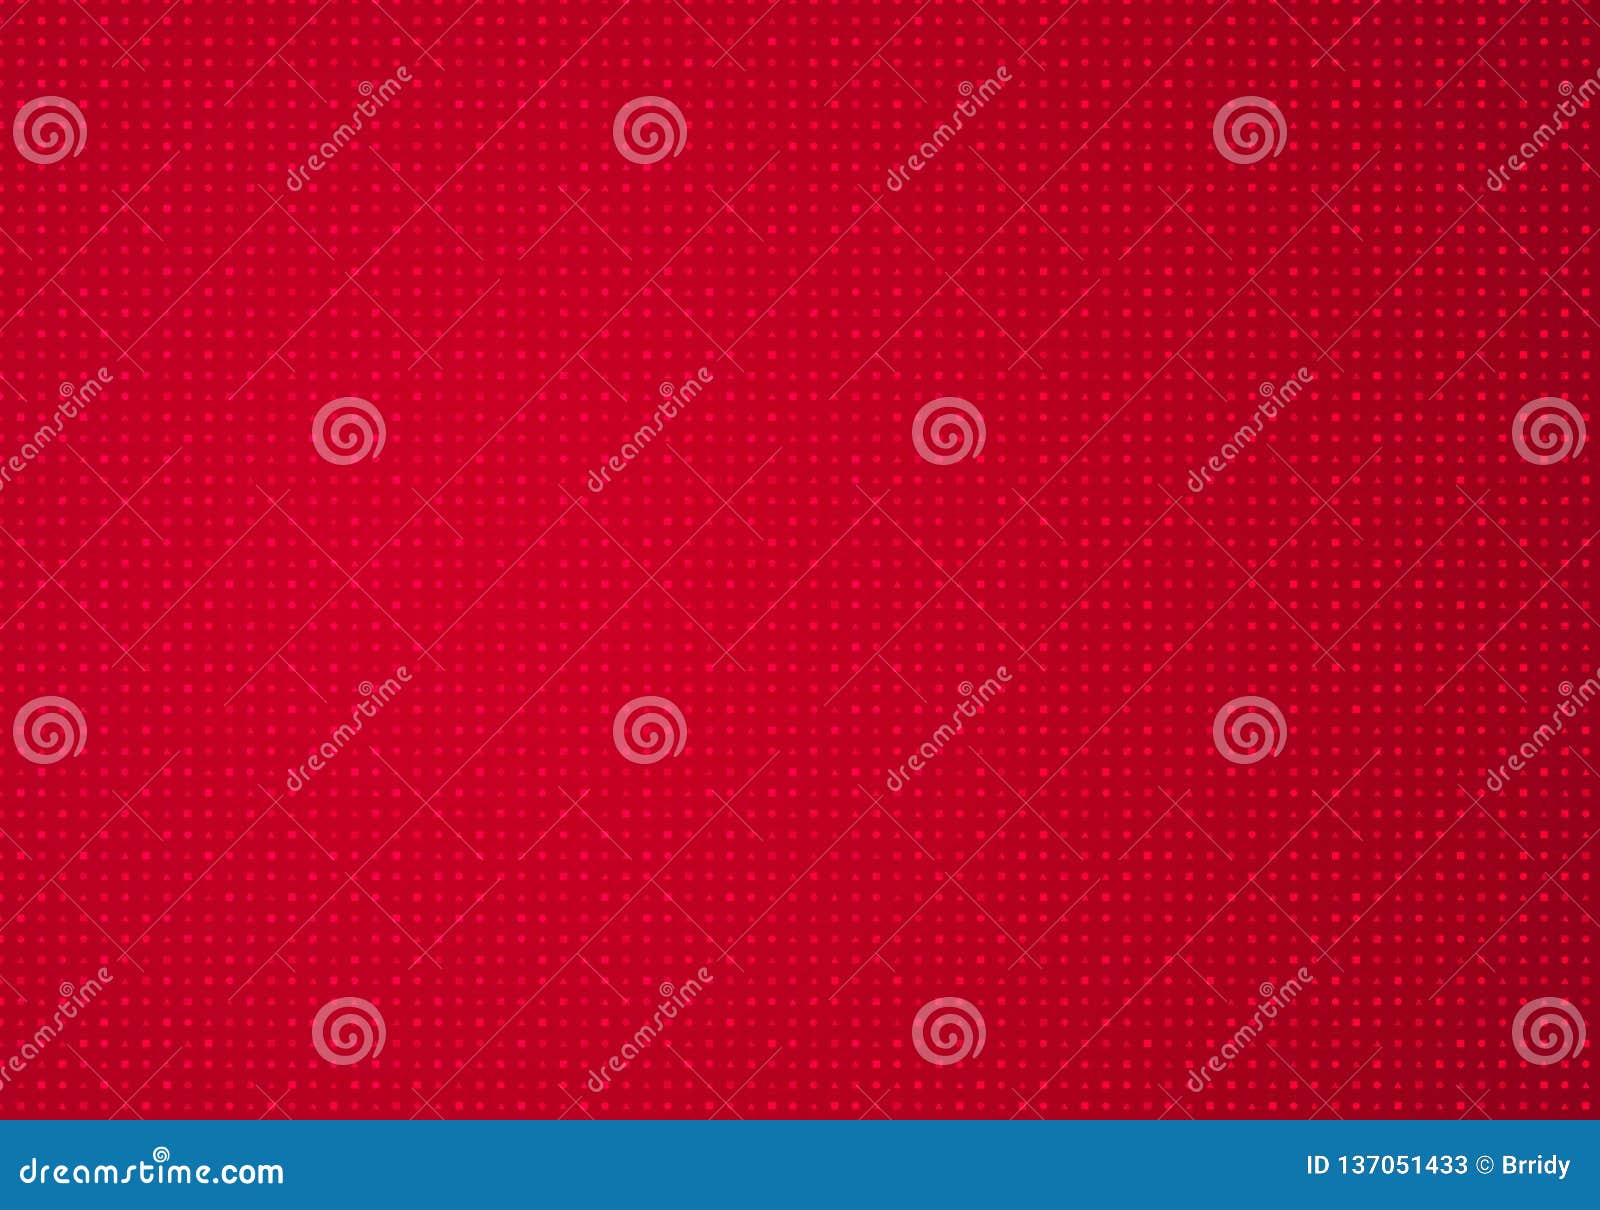 Bright Ruby Horizontal Vector Background With Geometric Pattern Red